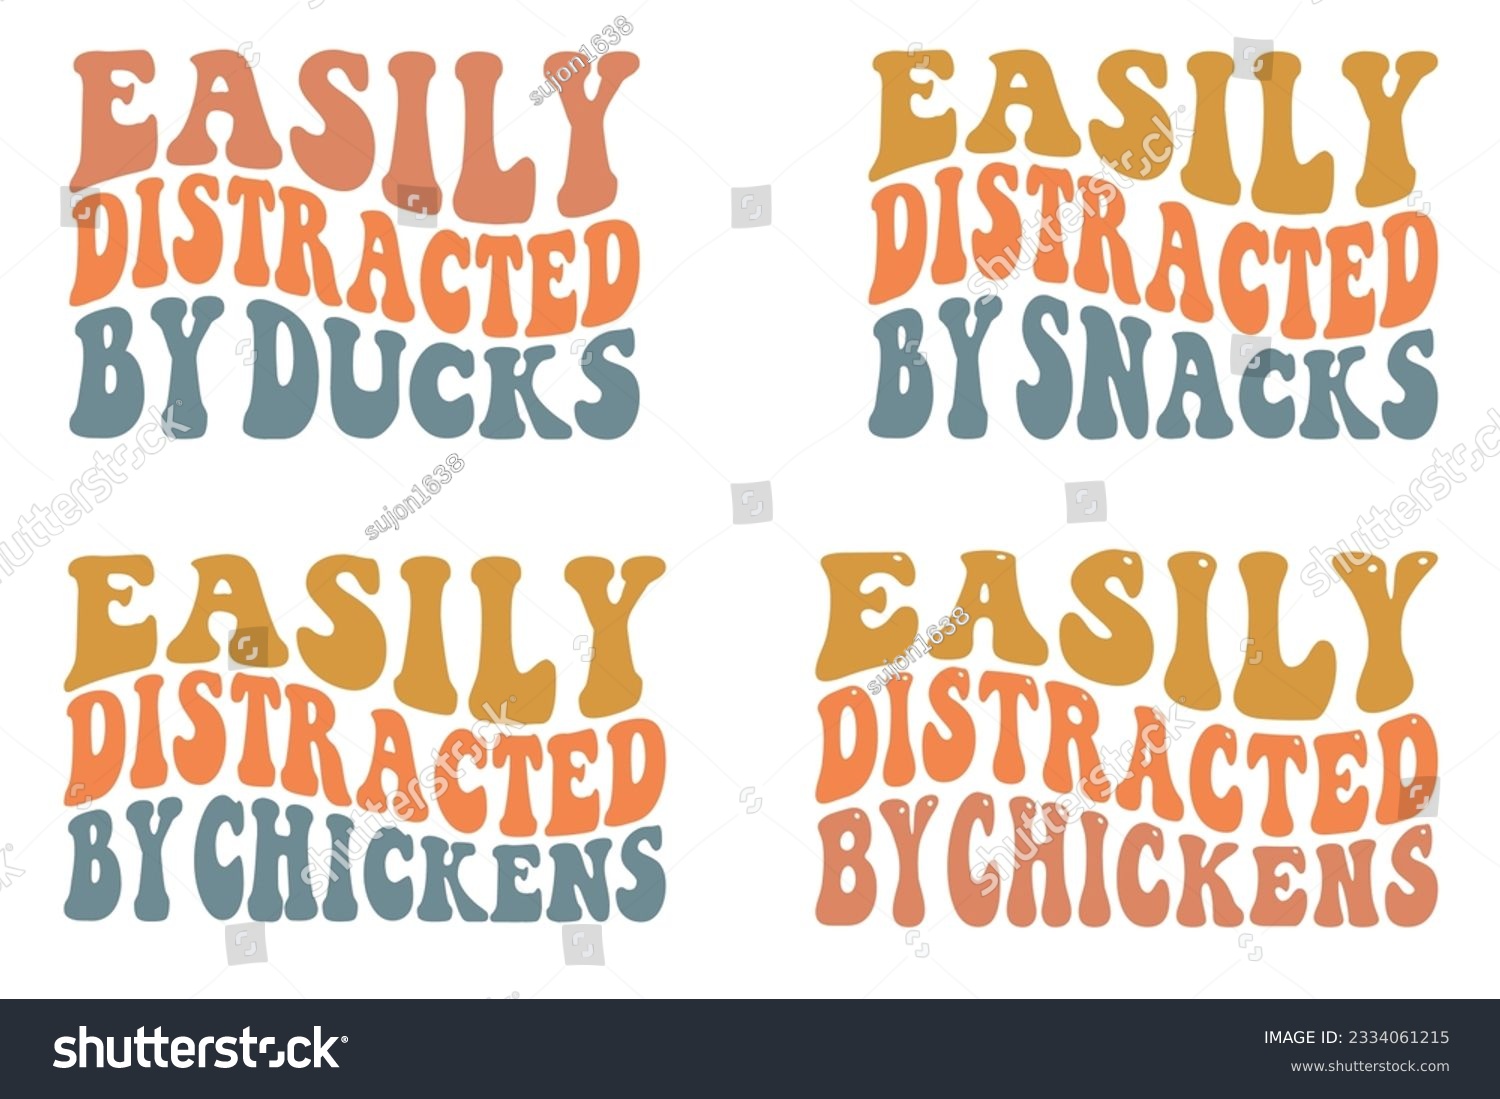 SVG of Easily Distracted by Ducks, Easily Distracted by snacks, Easily Distracted by chickens retro wavy SVG bundle T-shirt svg